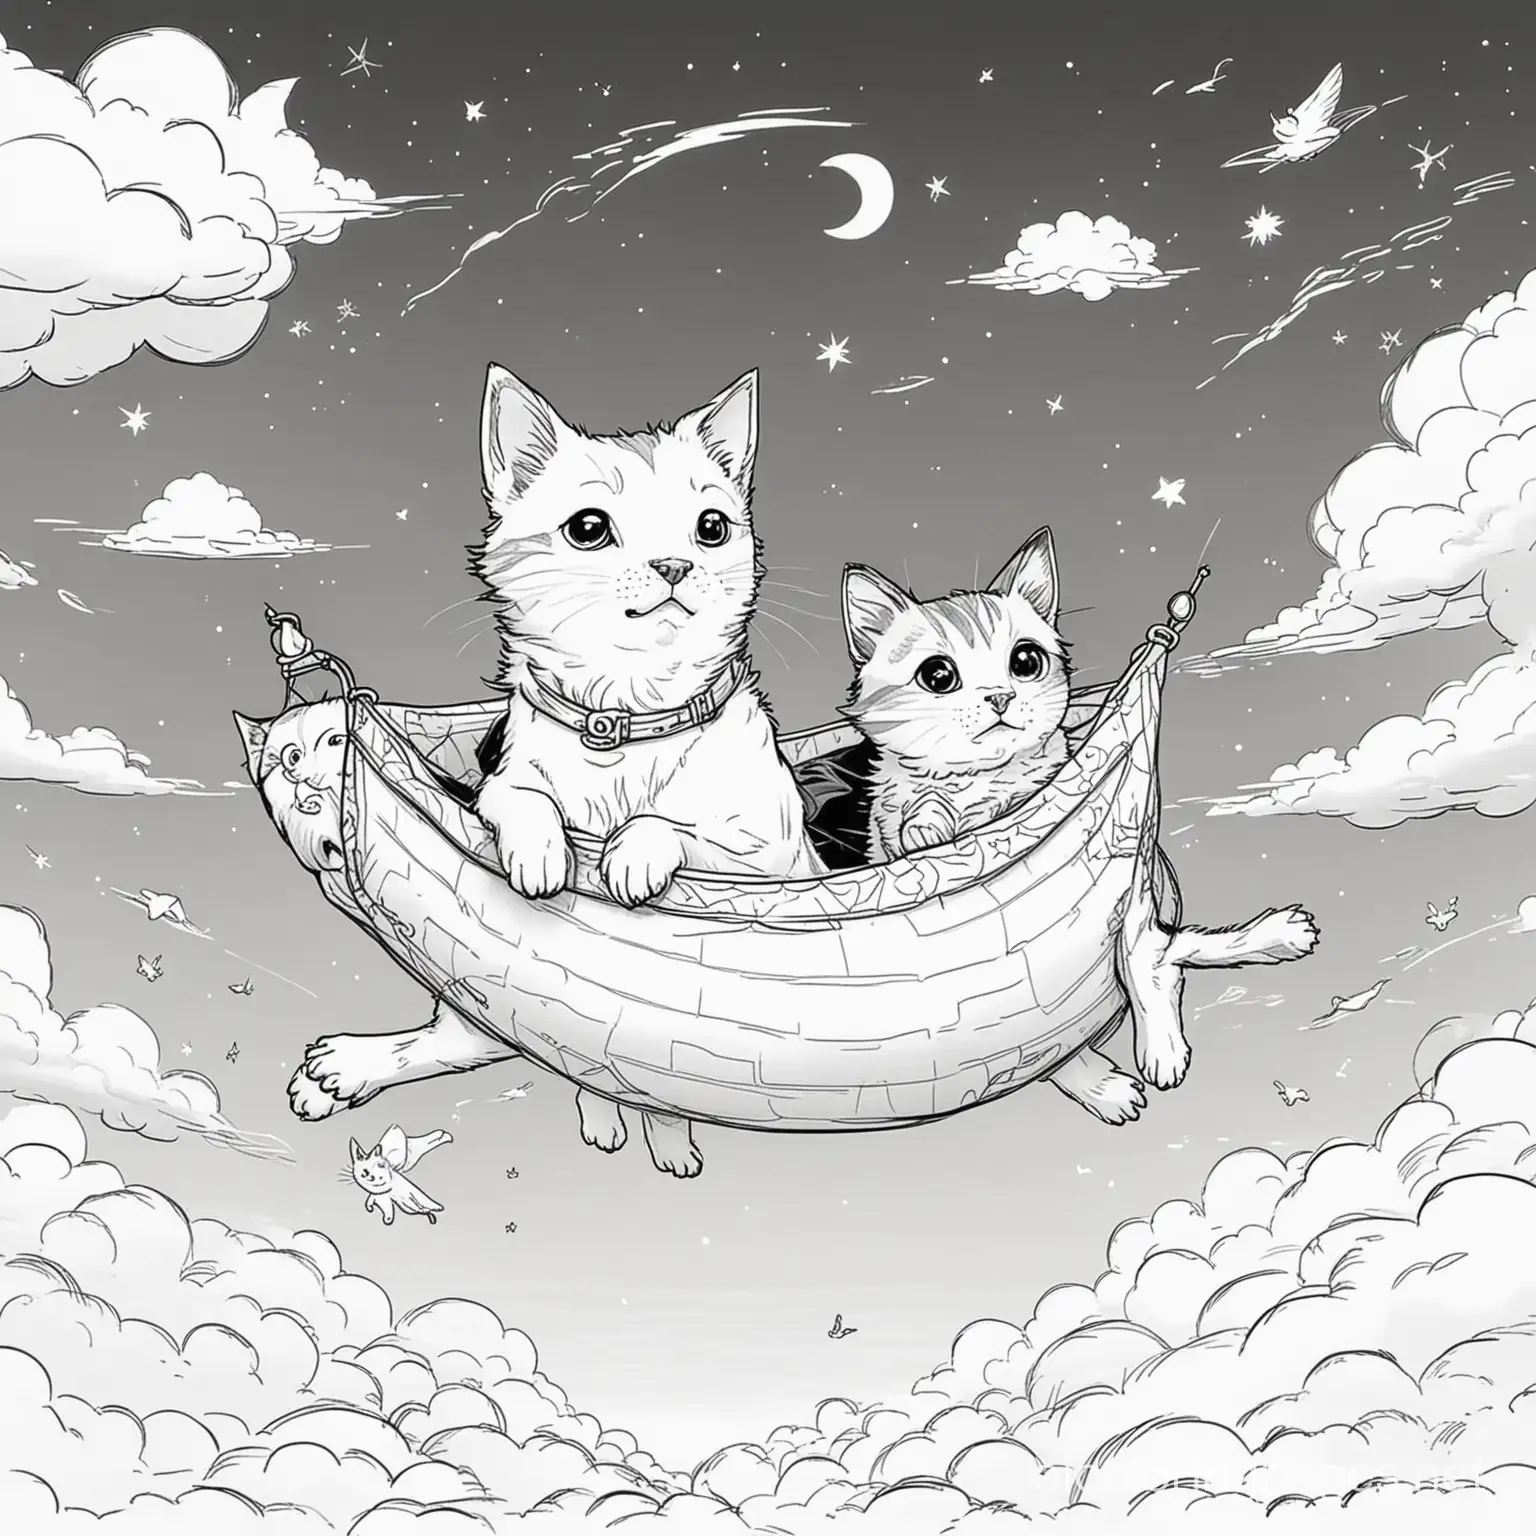 a dog floating happily in the sky with a cat floating happily in the sky, Coloring Page, black and white, line art, white background, Simplicity, Ample White Space. The background of the coloring page is plain white to make it easy for young children to color within the lines. The outlines of all the subjects are easy to distinguish, making it simple for kids to color without too much difficulty